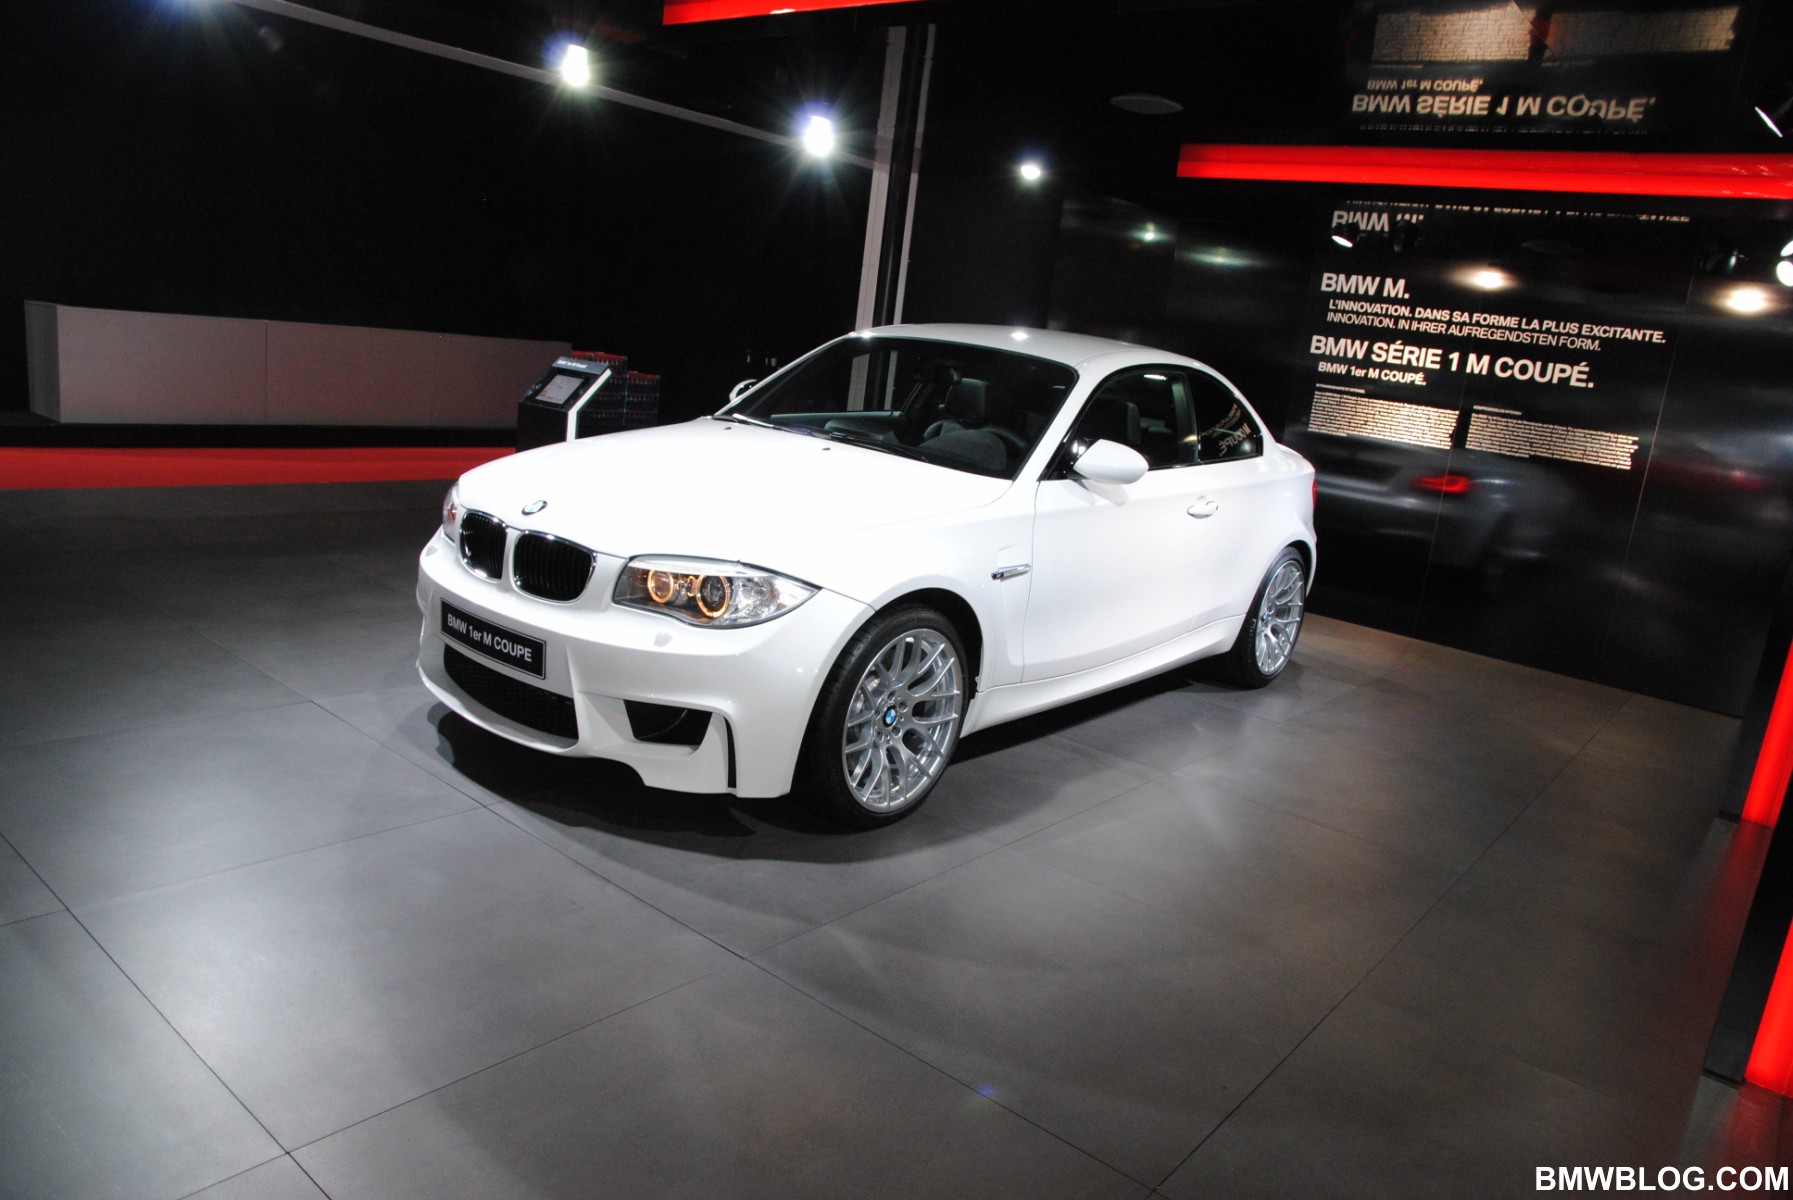 Low-Mileage BMW 1M Currently For Sale on Bring-a-Trailer